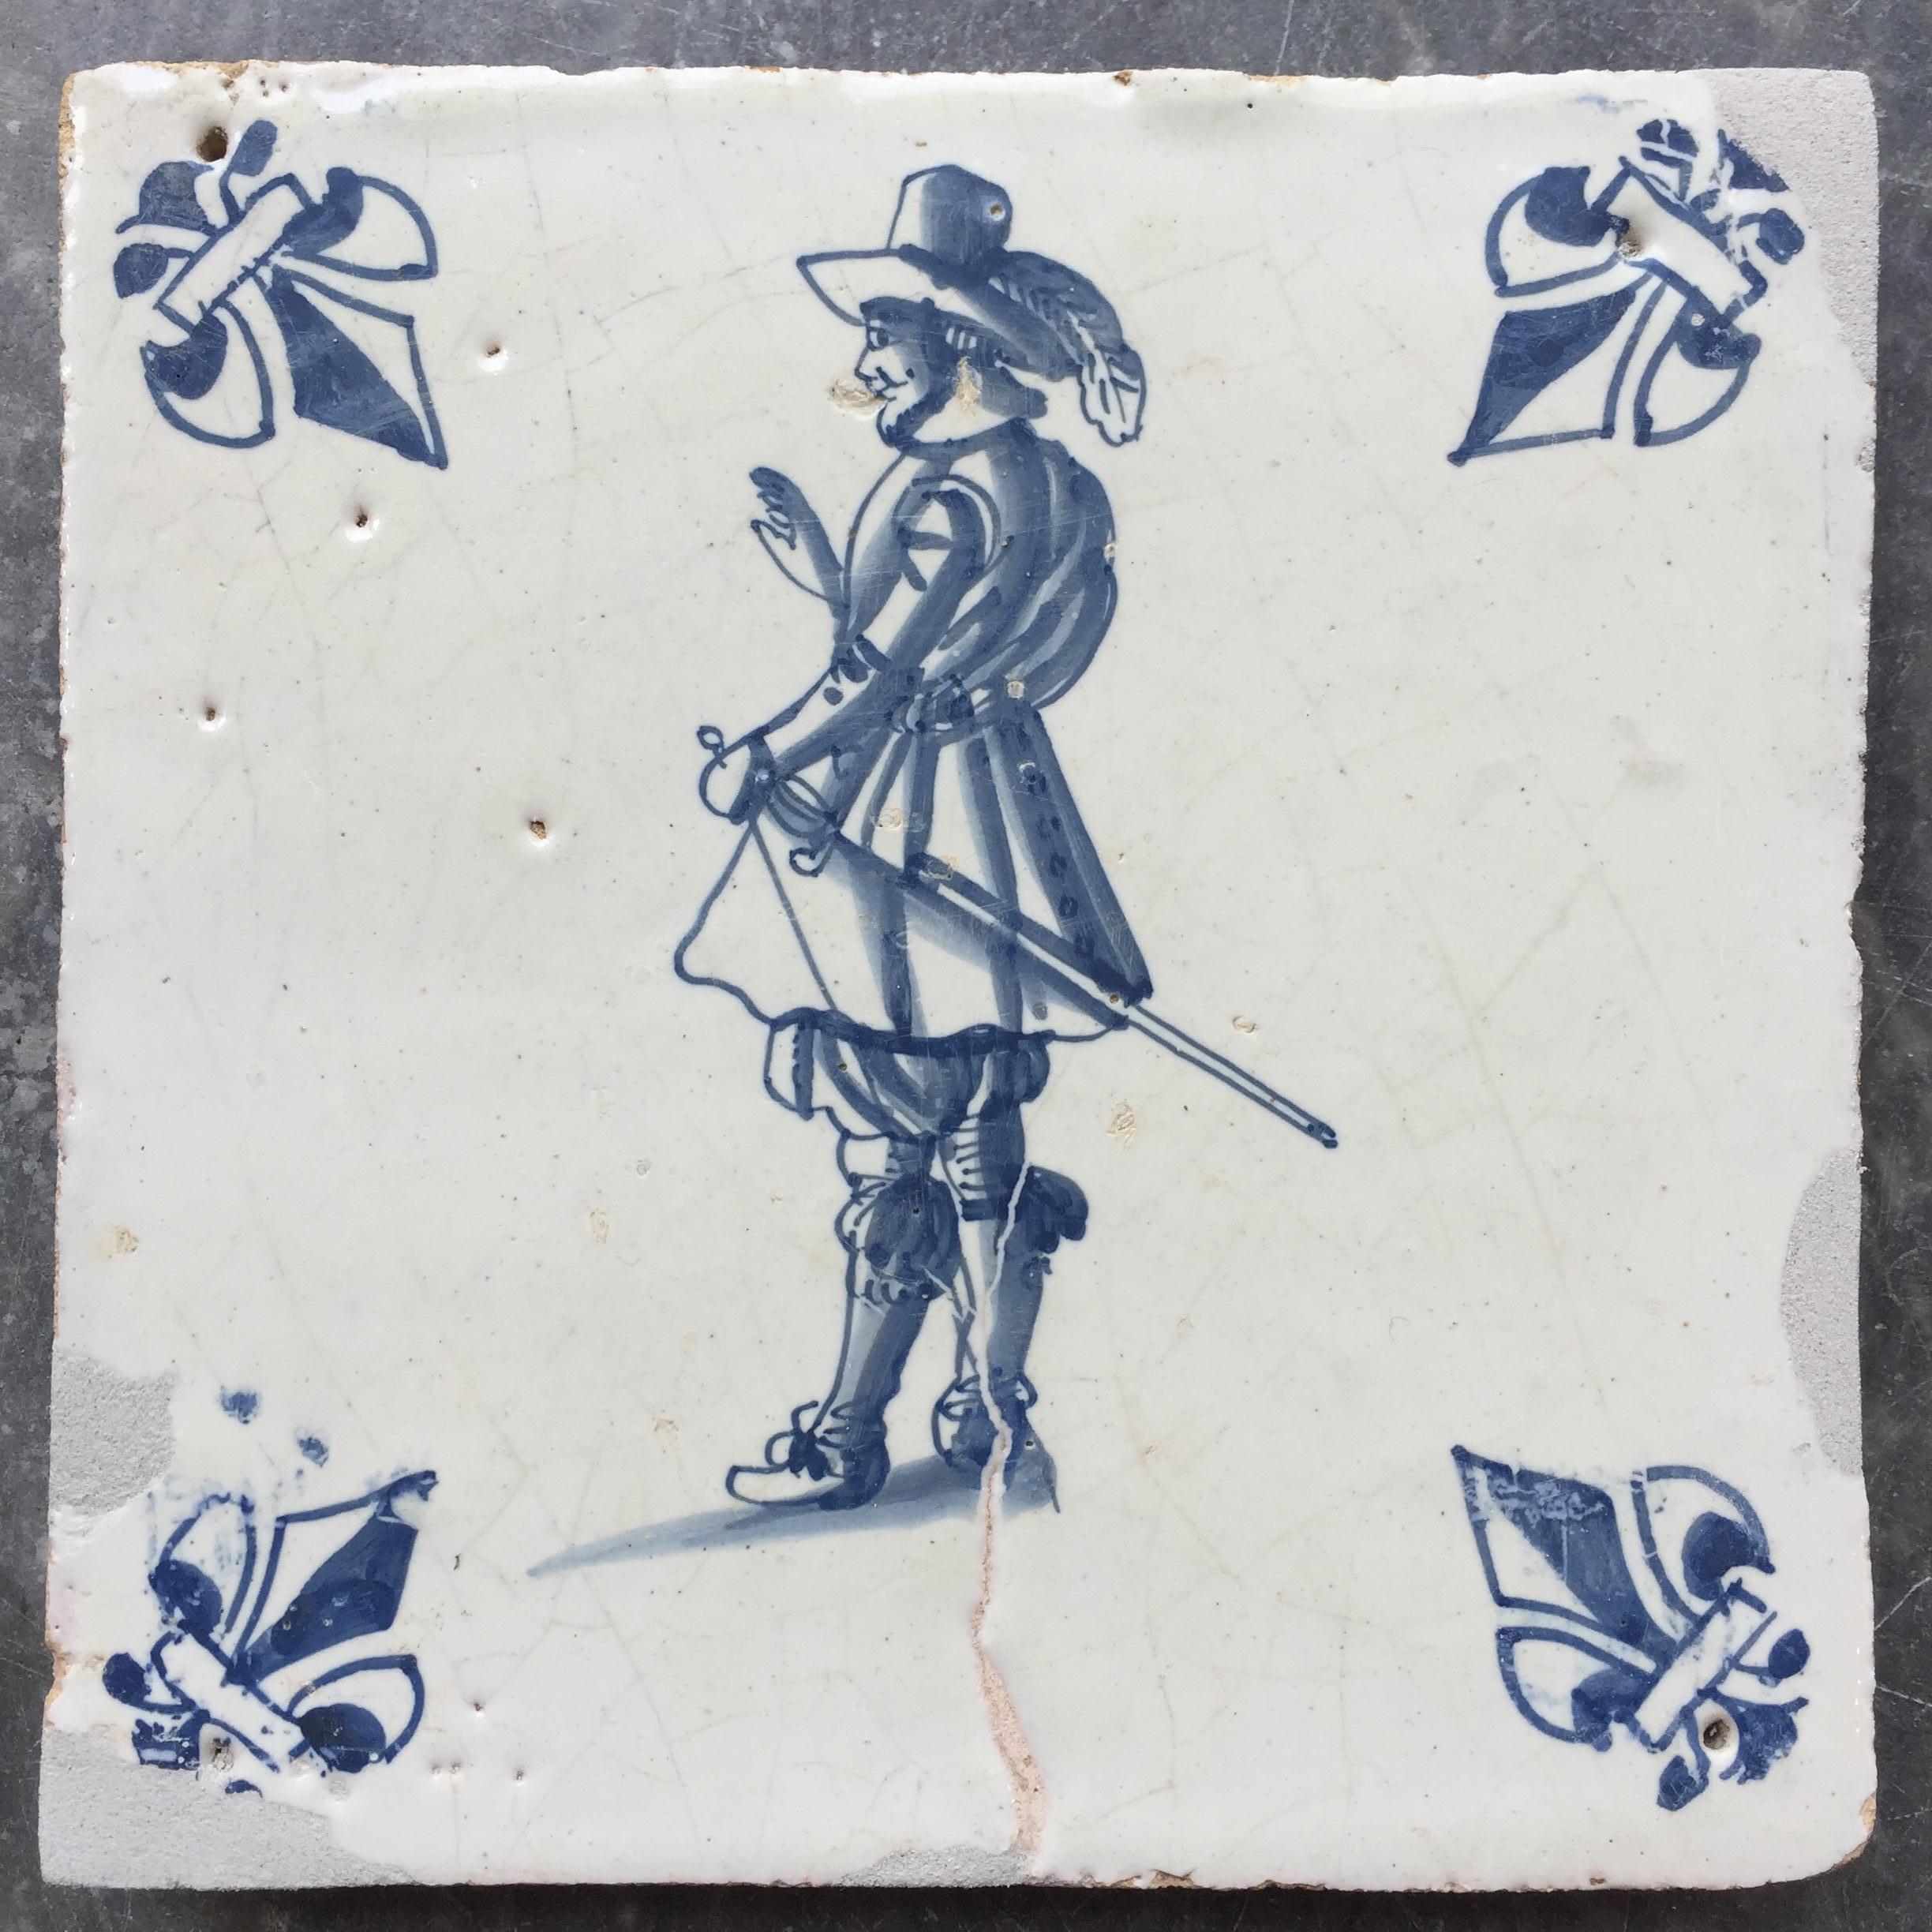 Exceptional Set of 20 Blue and White Dutch Delft Tiles with Figures 14